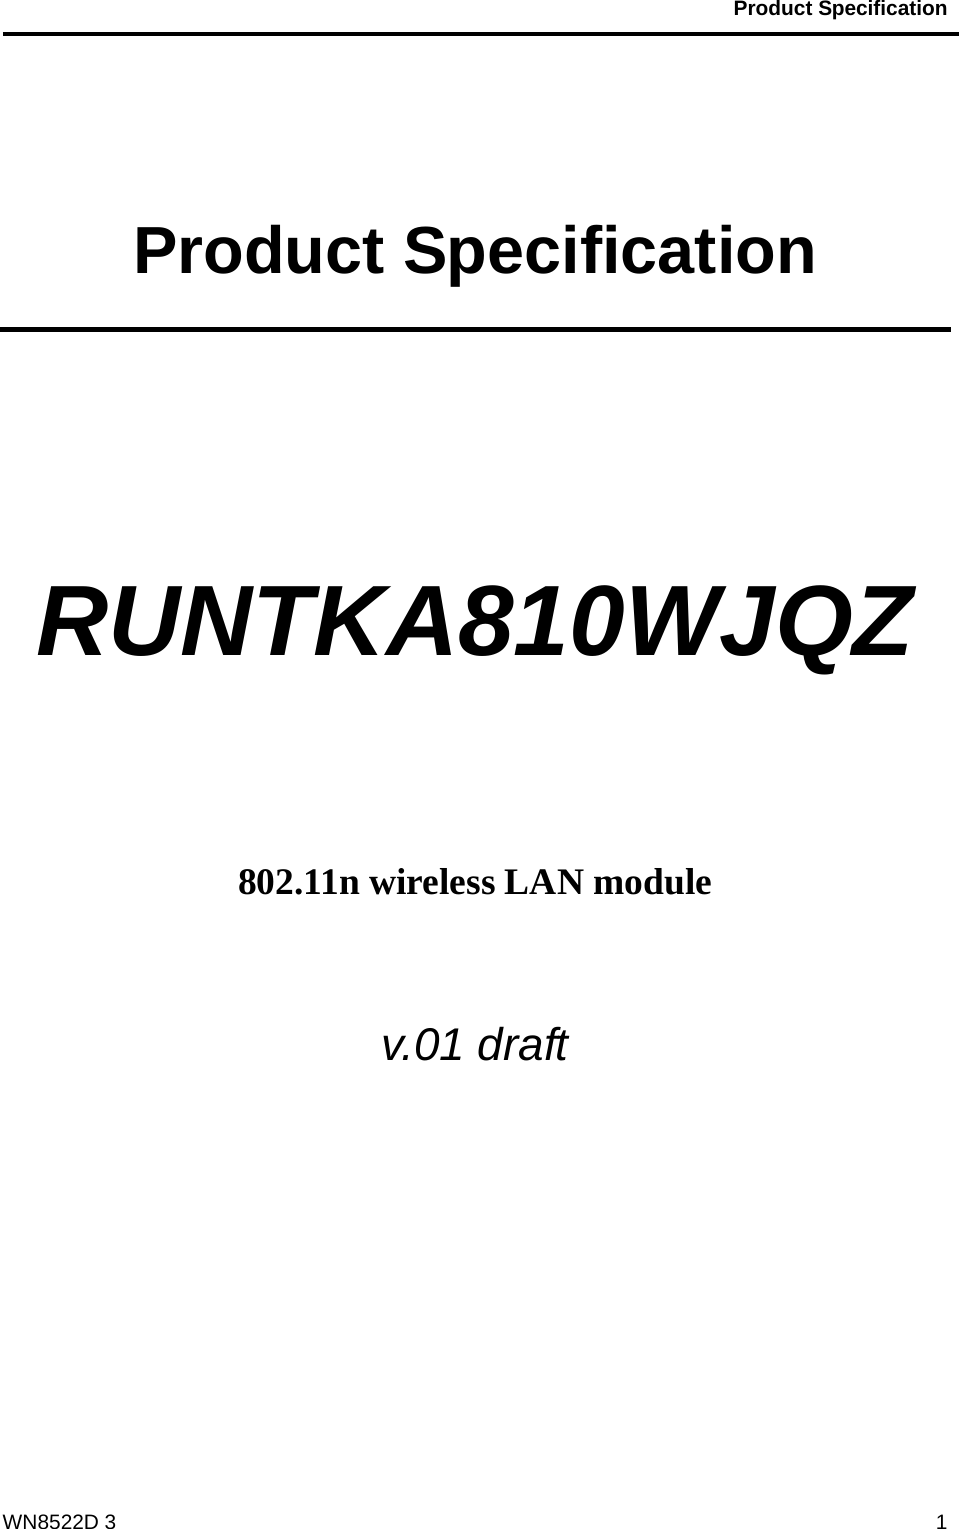                                           Product Specification                                              WN8522D 3  1 Product Specification   RUNTKA810WJQZ     802.11n wireless LAN module  v.01 draft    